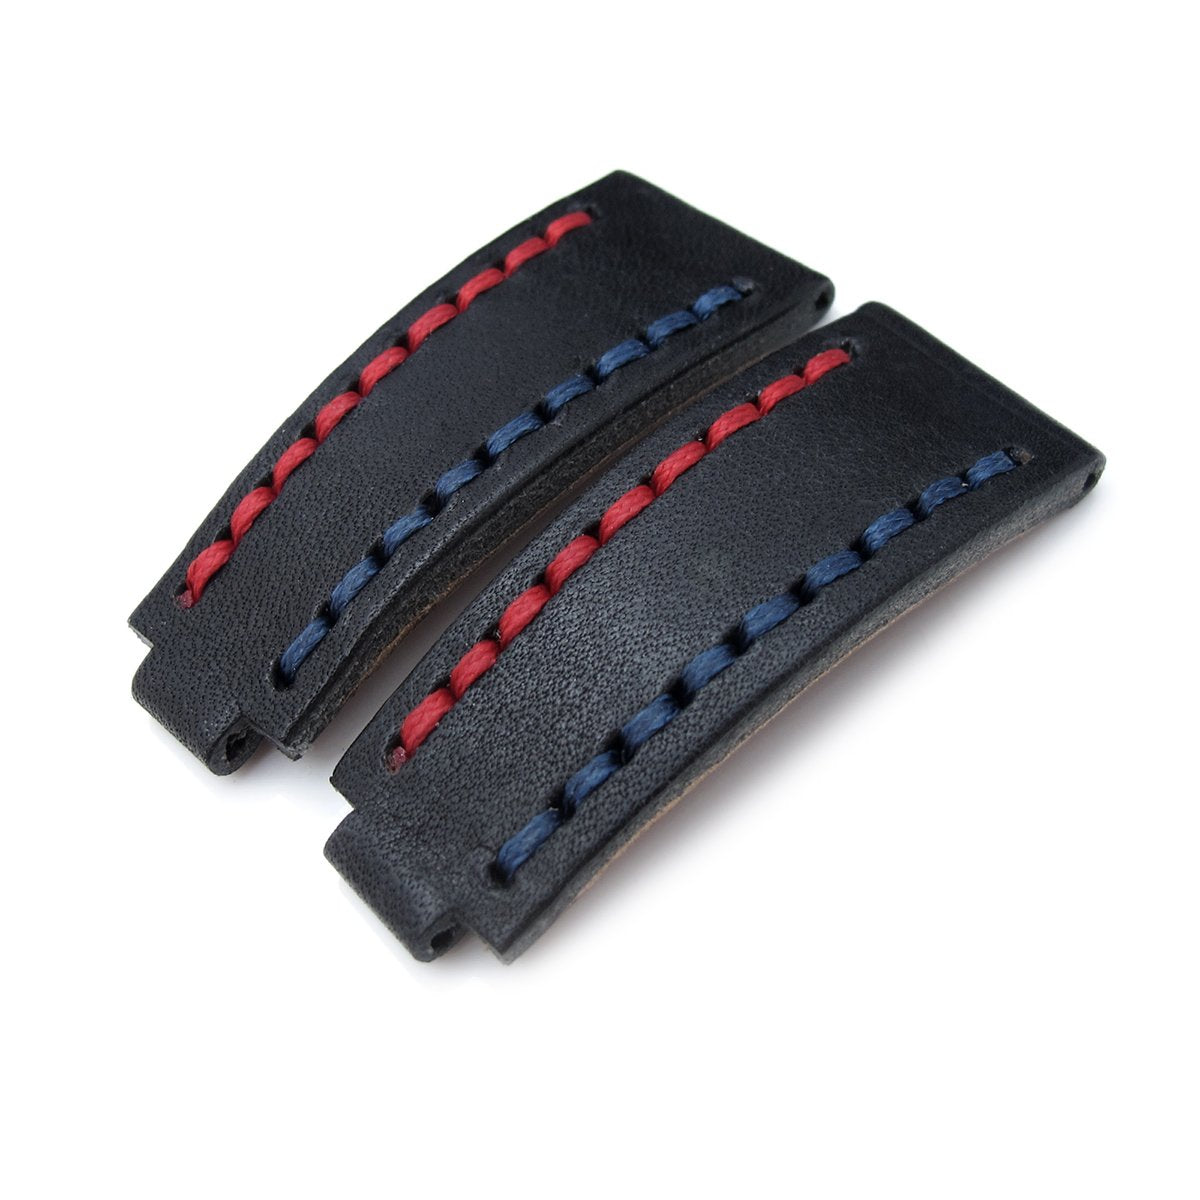 20mm MiLTAT RX 'X' Collection Watch Strap NERO Black Genuine Calf Red + Navy Blue St. Tailor-made for RX SUB & Explo Strapcode Watch Bands